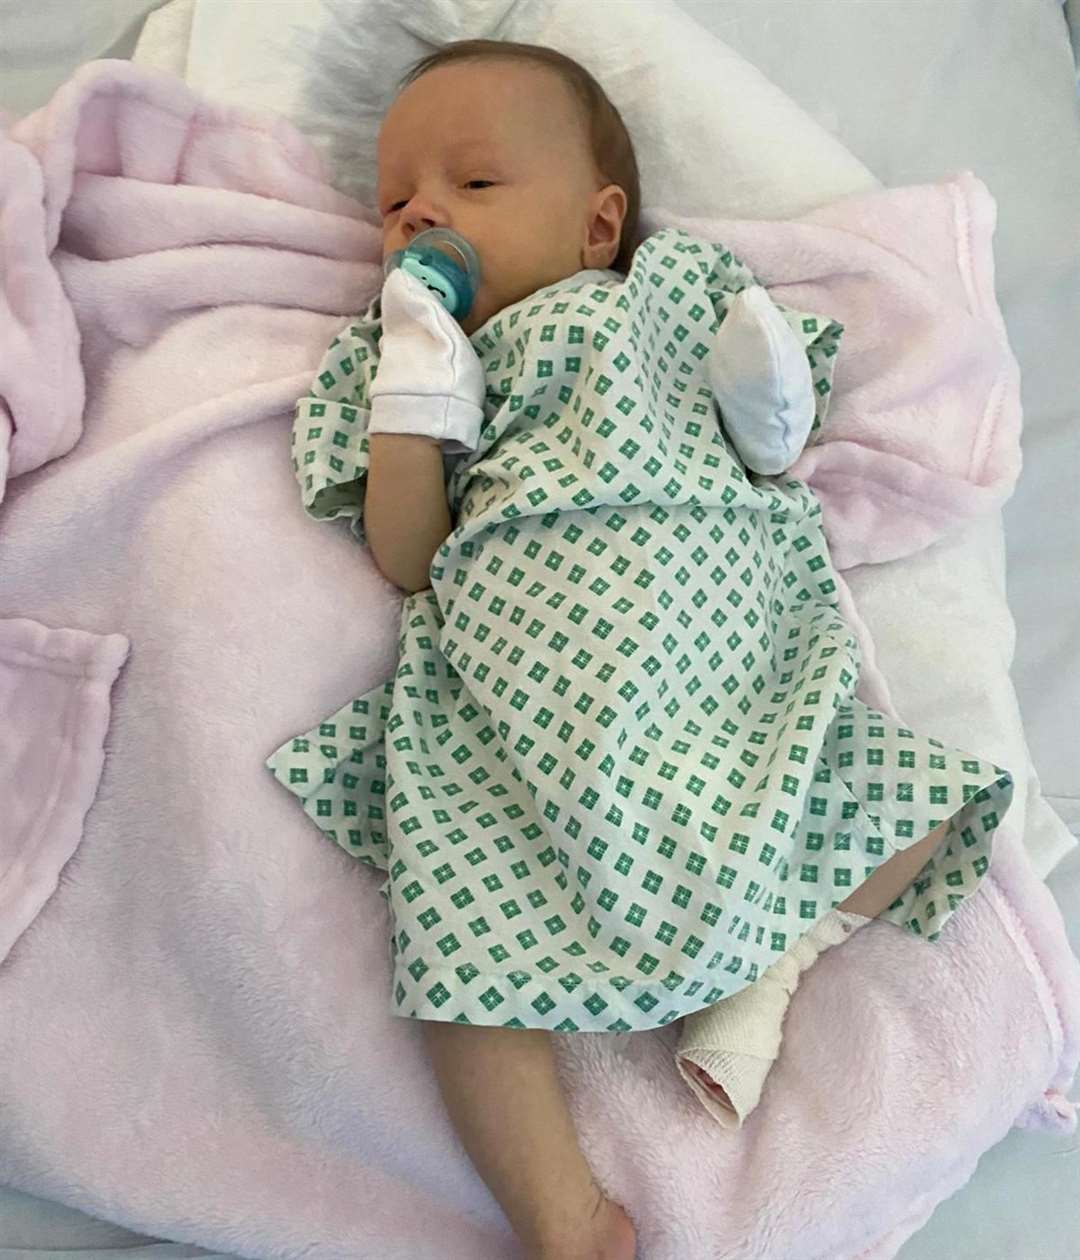 Gracie Harwood was just a few months old when she underwent major surgery at King's College Hospital in London. Photo credit: Rae Harwood